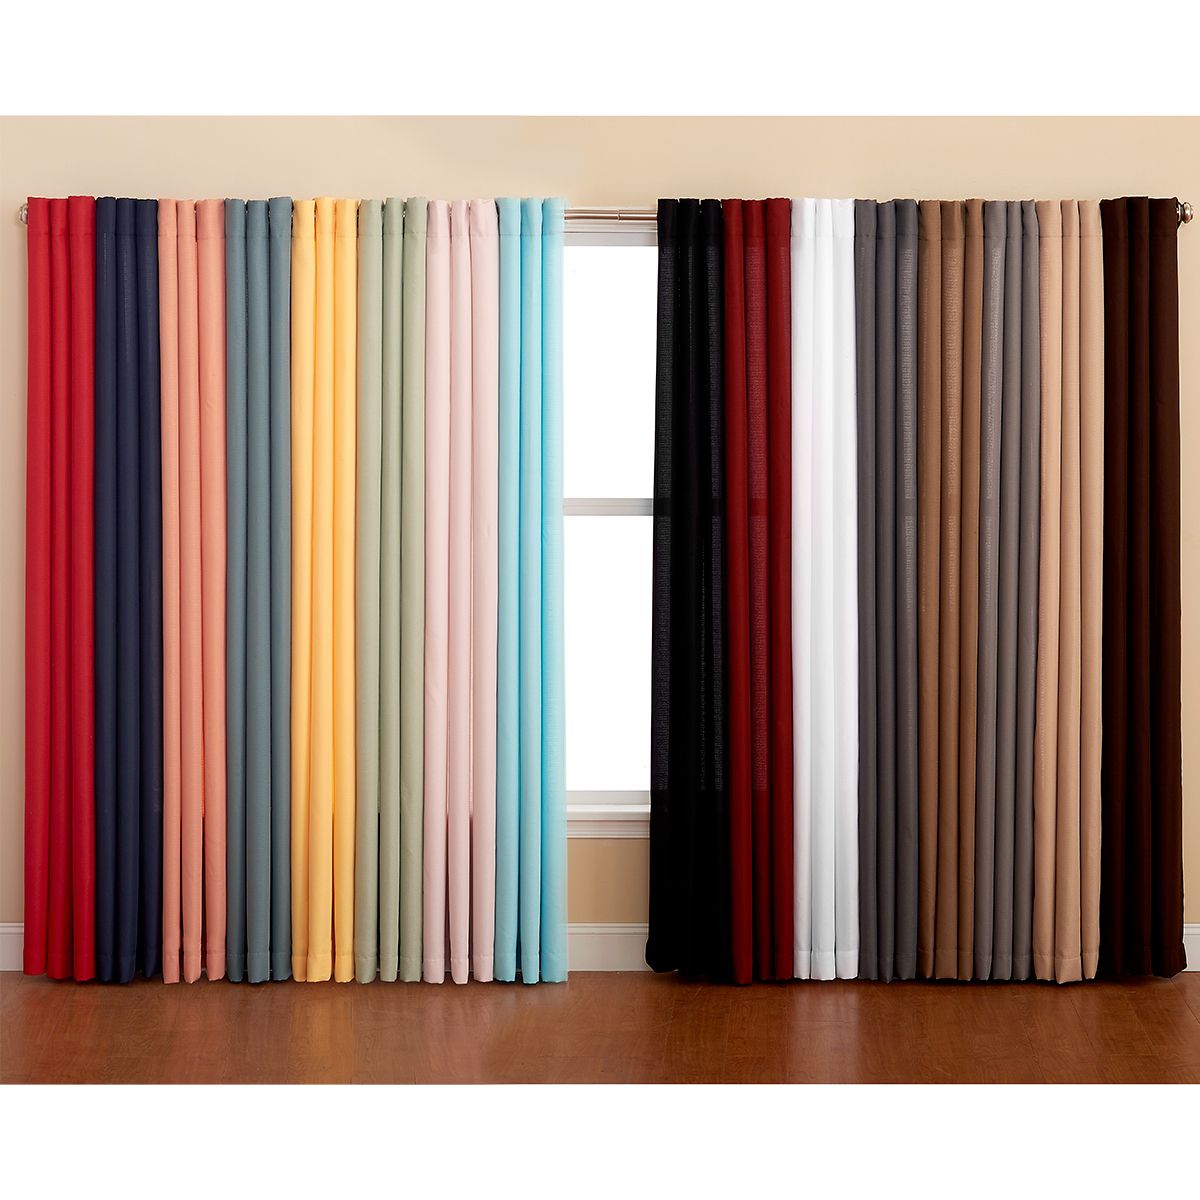 Grommet Curtain Panels Intended For Recent Montego Woven Grommet Curtain Panel (View 20 of 20)